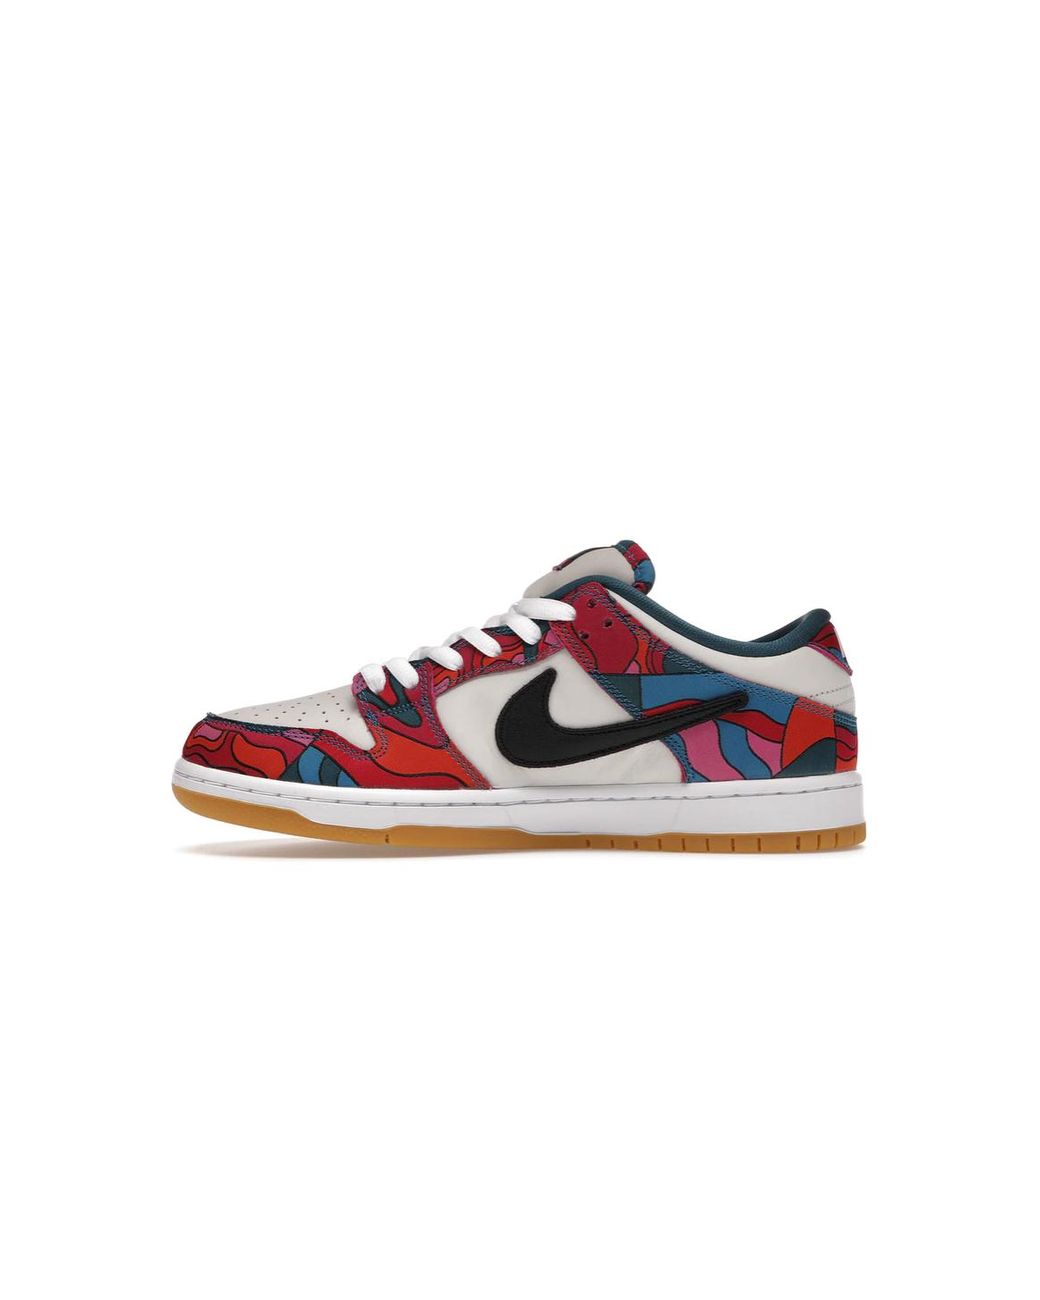 Nike Sb Dunk Low Parra Abstract Art in Black | Lyst